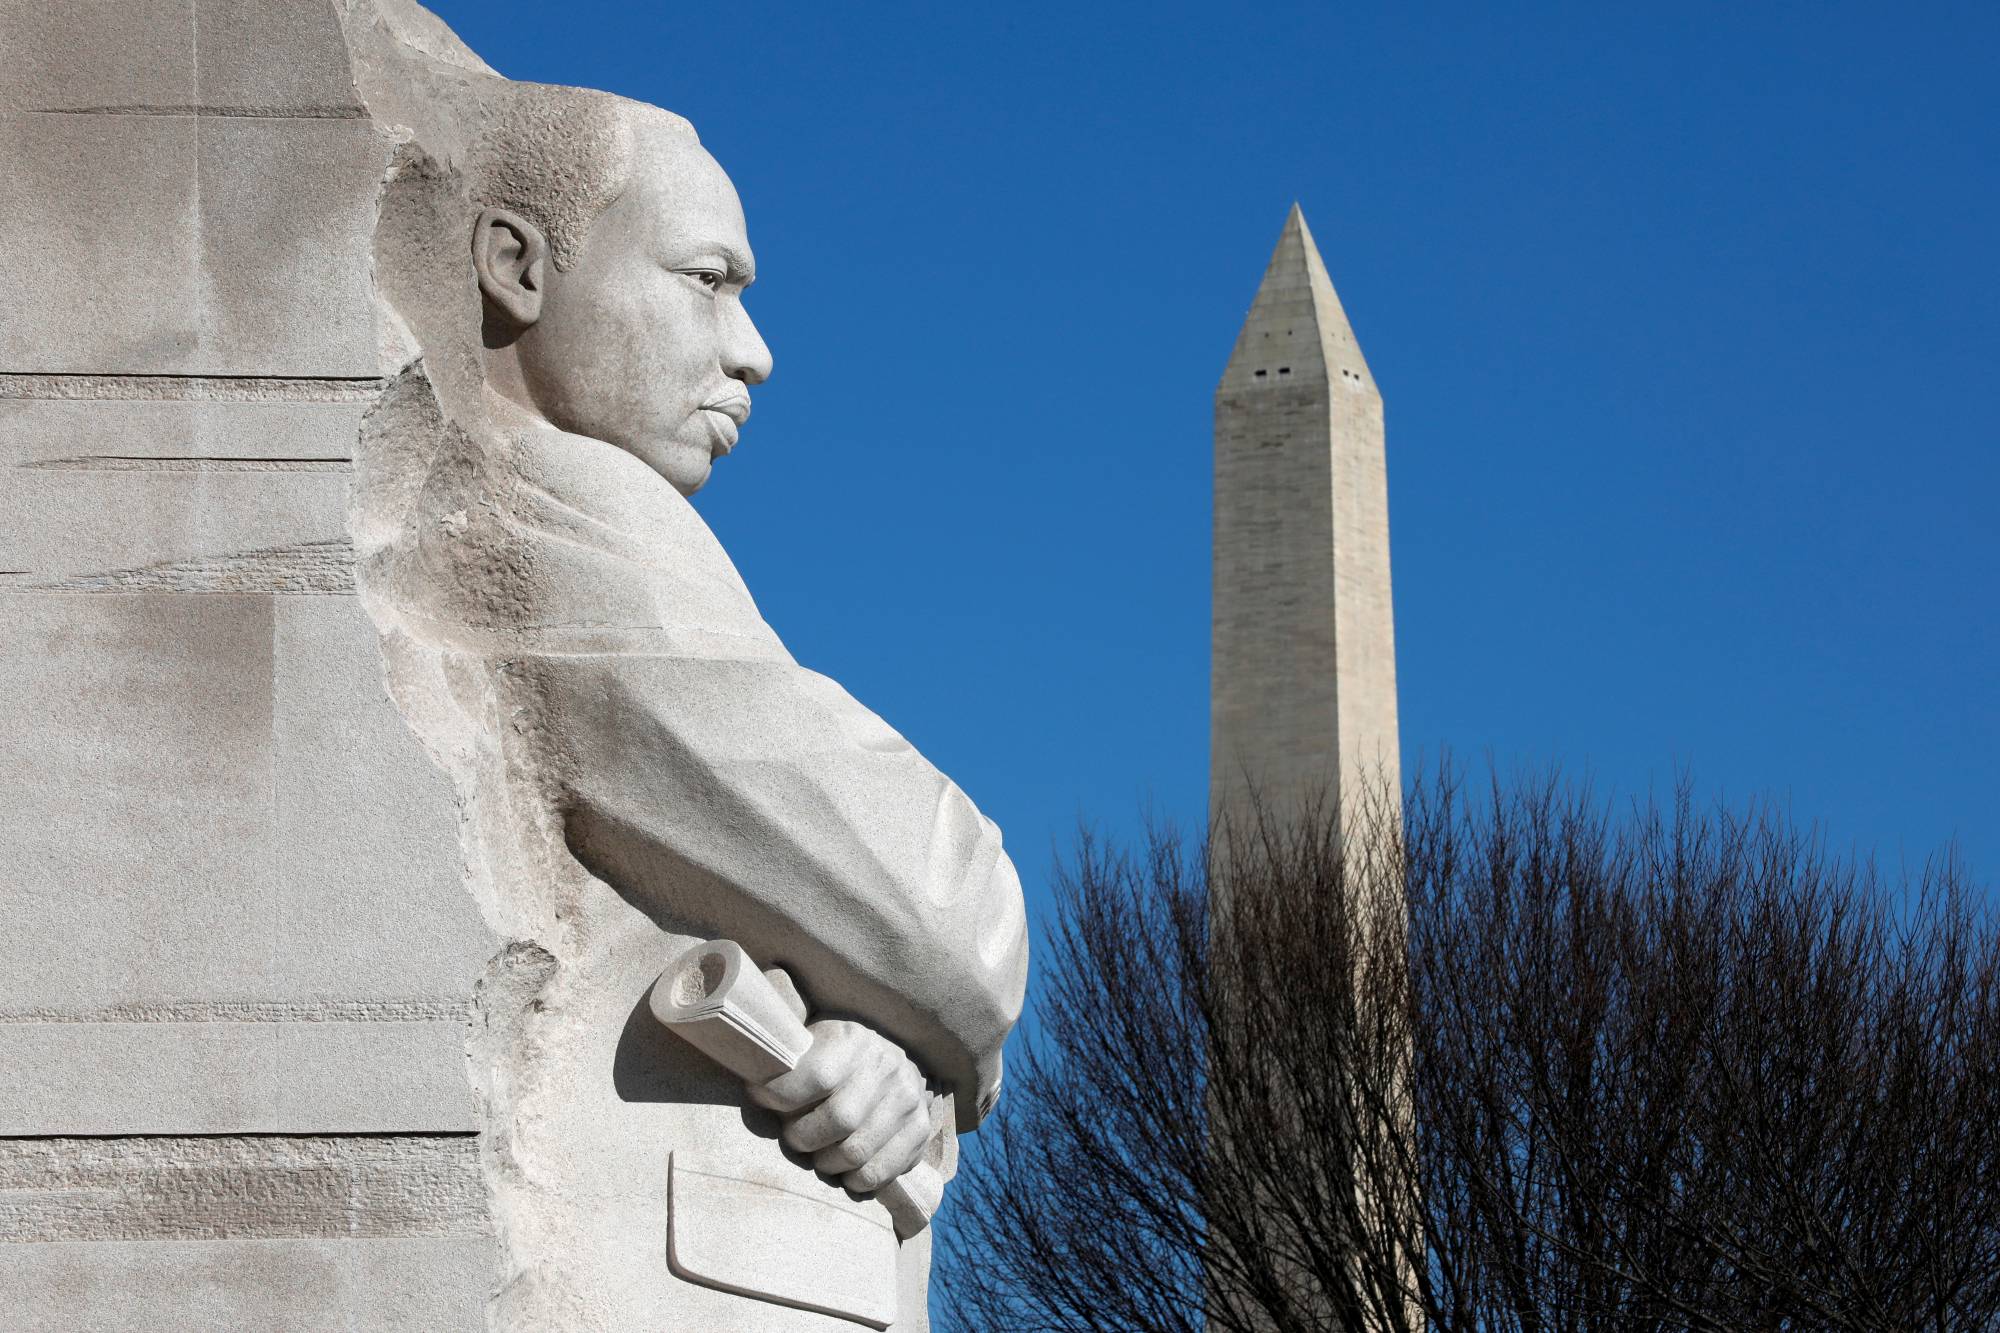 Keep hope alive: The Martin Luther King, Jr. Memorial in Washington, D.C., opened 10 years ago this August. It includes the Stone of Hope, a granite statue of King carved by sculptor Lei Yixin. | REUTERS